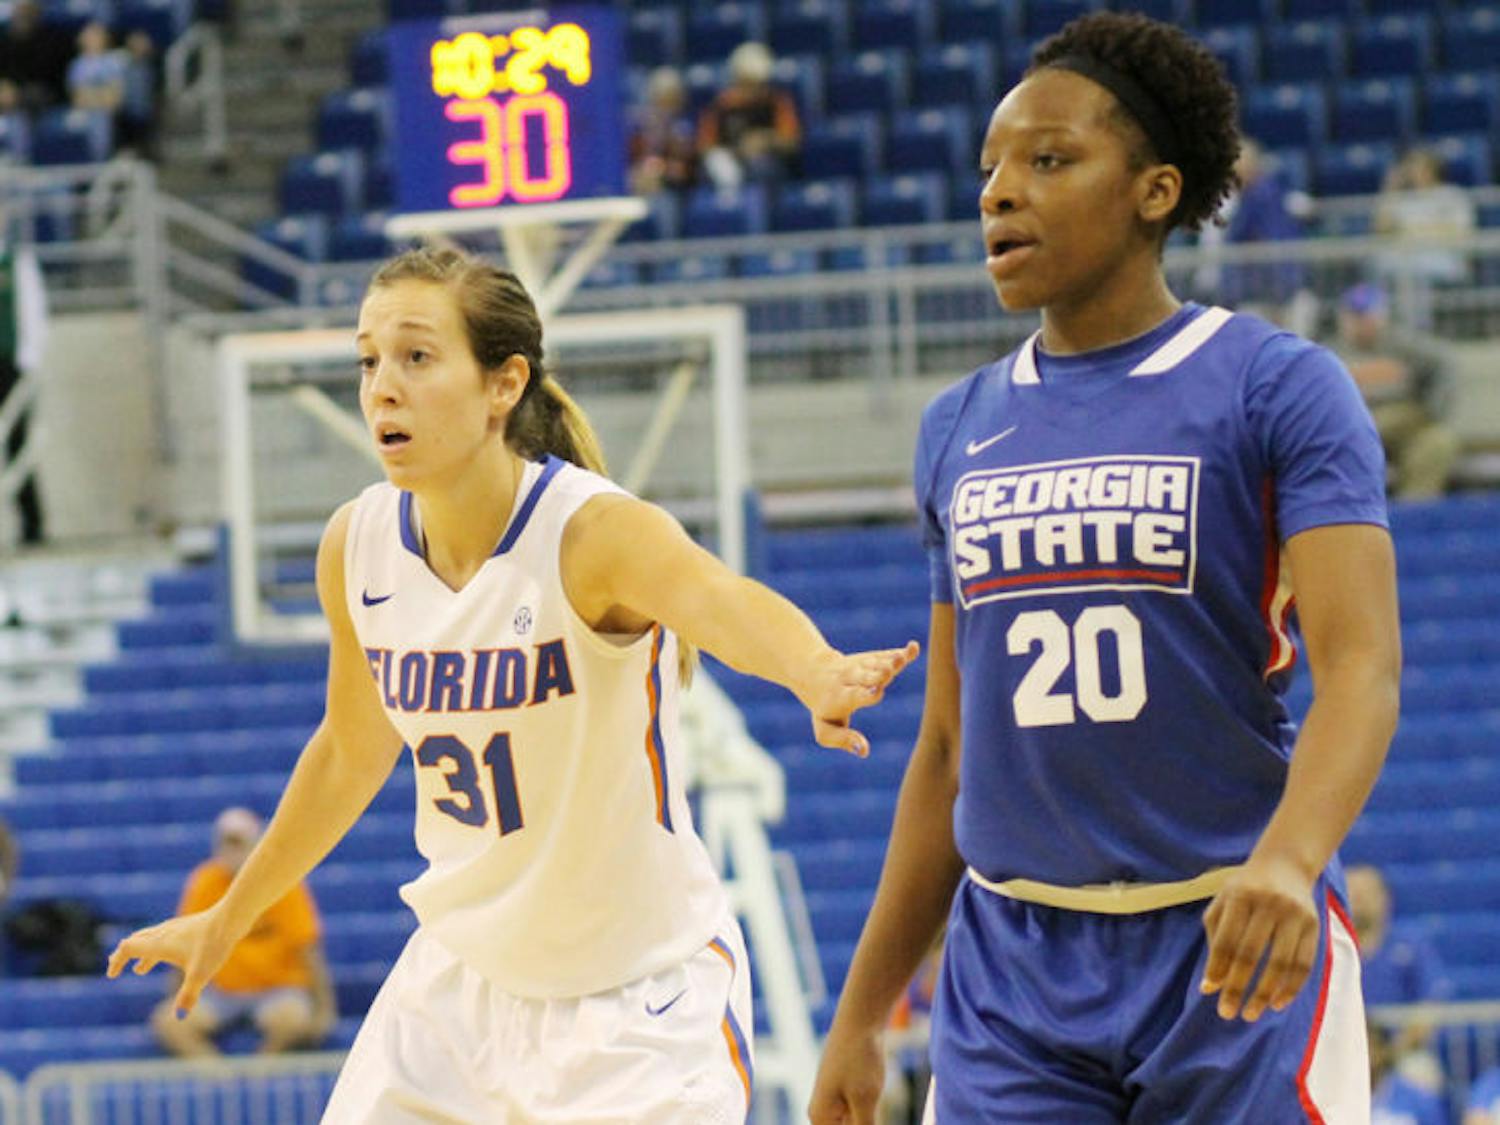 Junior forward Lily Svete (31) guards sophomore guard Kayla Nolan (20) during Florida’s 84-65 victory against Georgia State on Nov. 11 in the O’Connell Center.